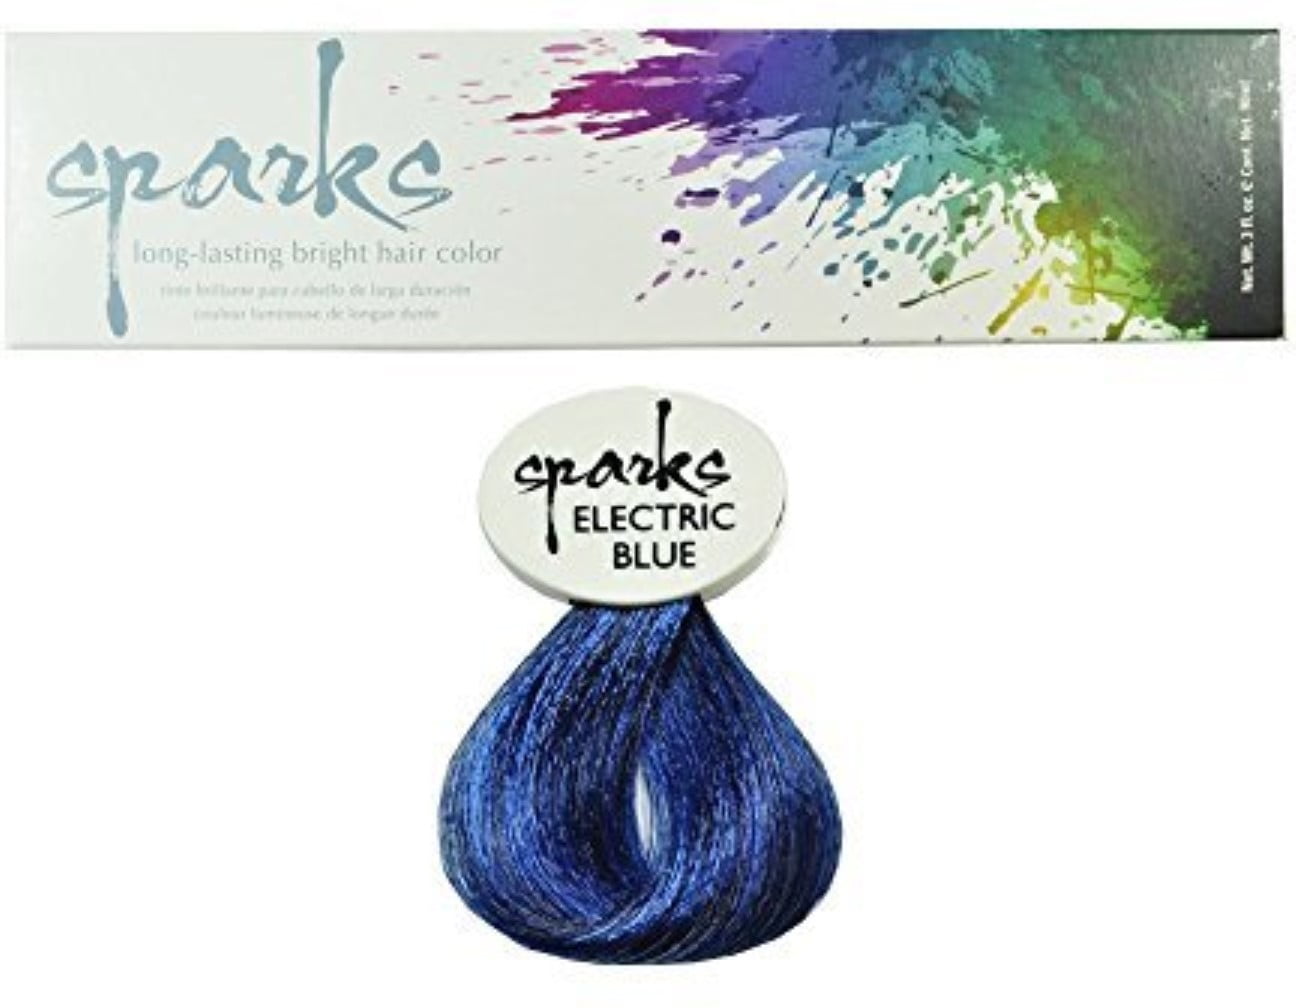 10. Sparks Long-Lasting Bright Hair Color in Electric Blue - wide 3